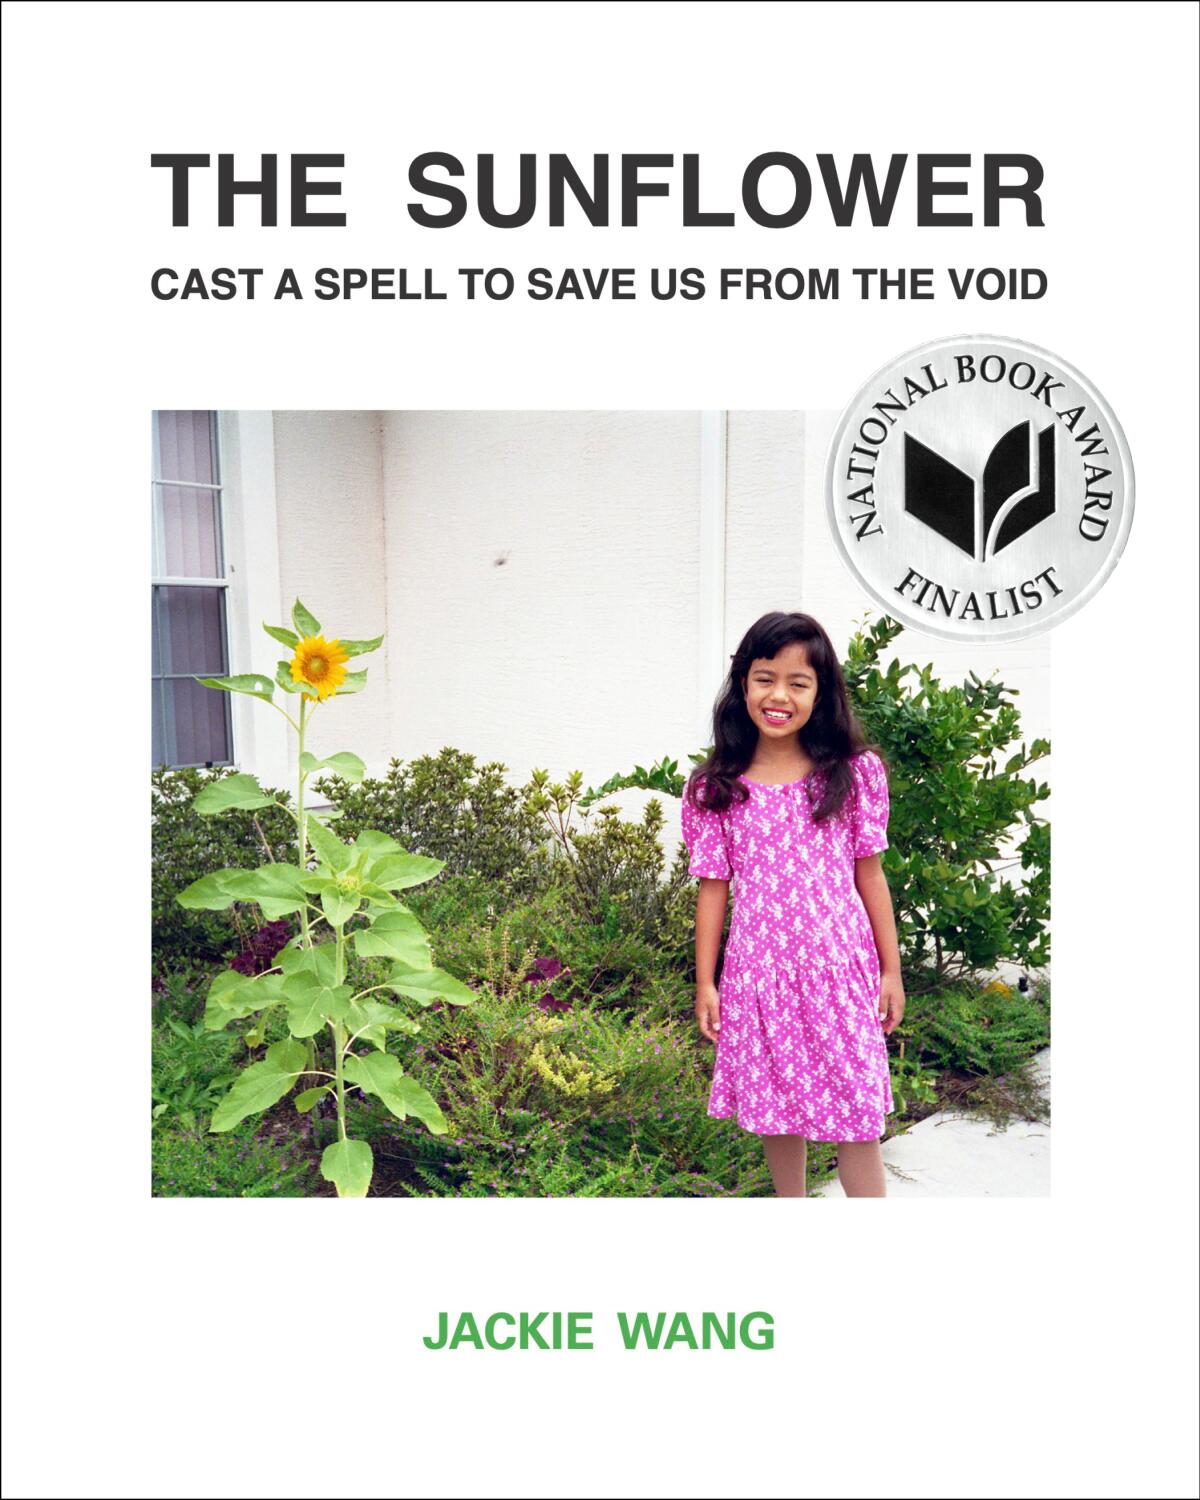 "The Sunflower Cast a Spell to Save Us From the Void," a book of poems by Jackie Wang.